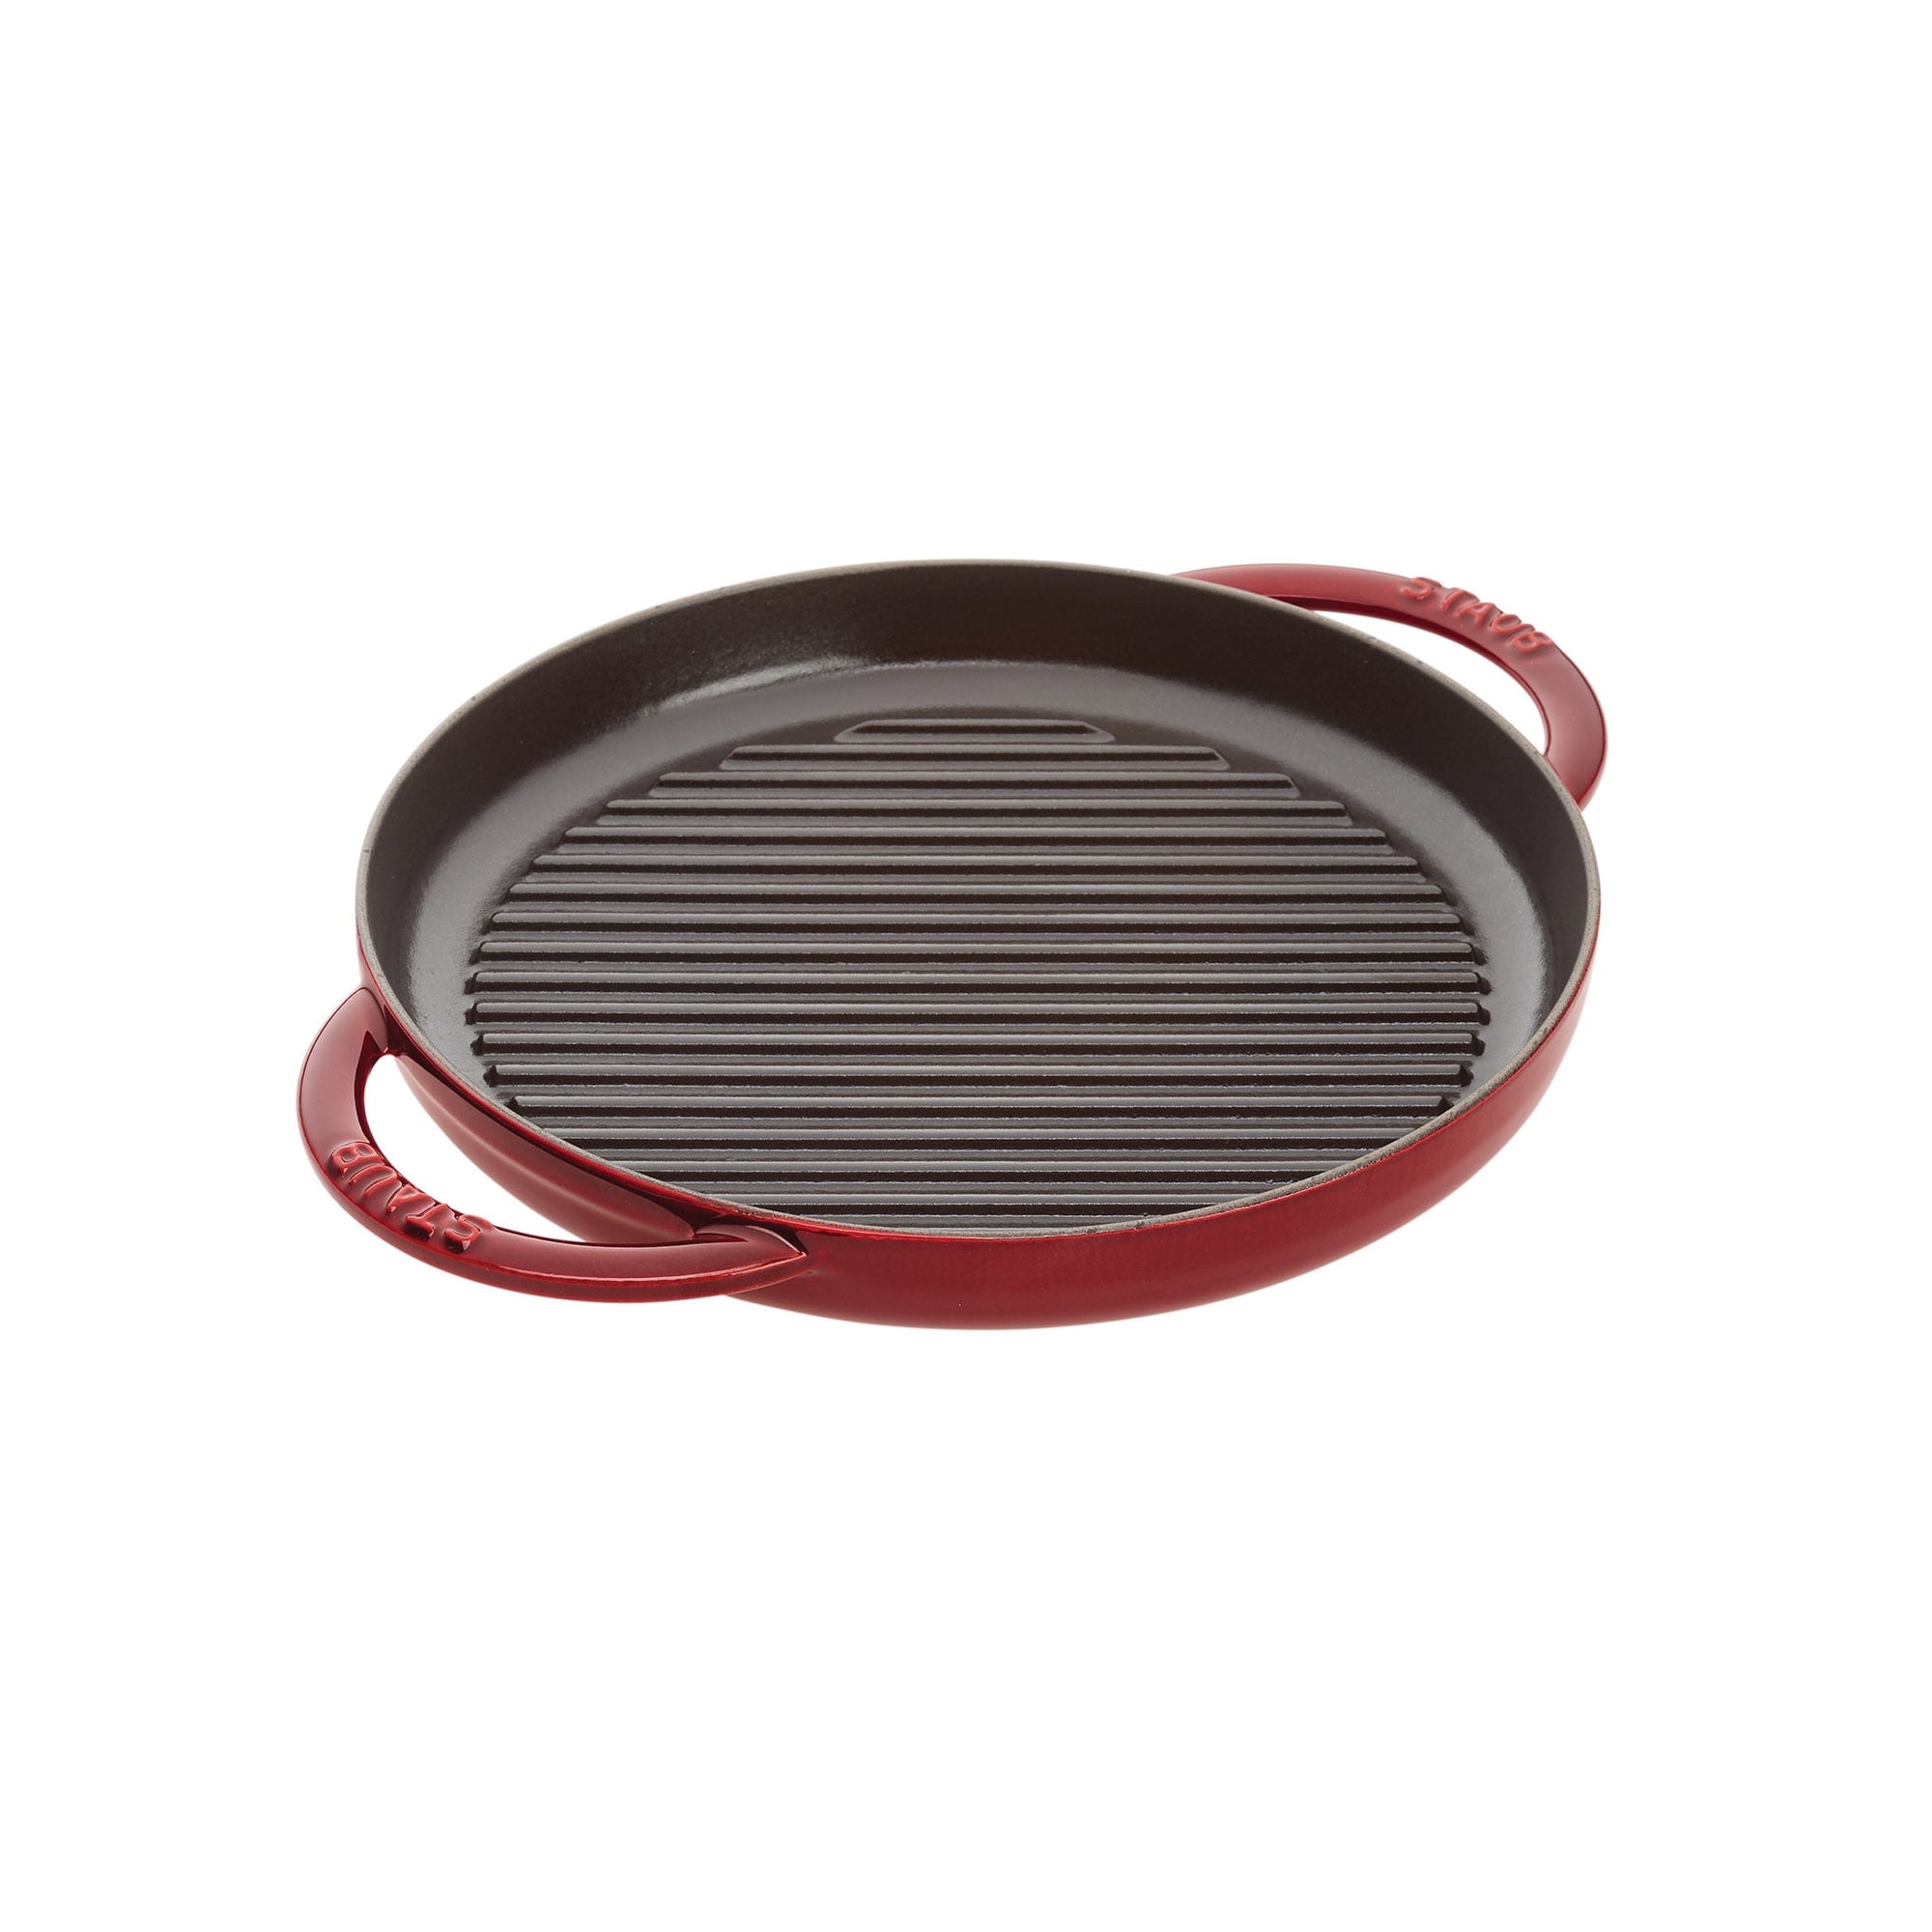 https://ak1.ostkcdn.com/images/products/is/images/direct/8d0c41c46073b90432fc125a56ea71c30942d444/Staub-Cast-Iron-10%22-Pure-Grill.jpg